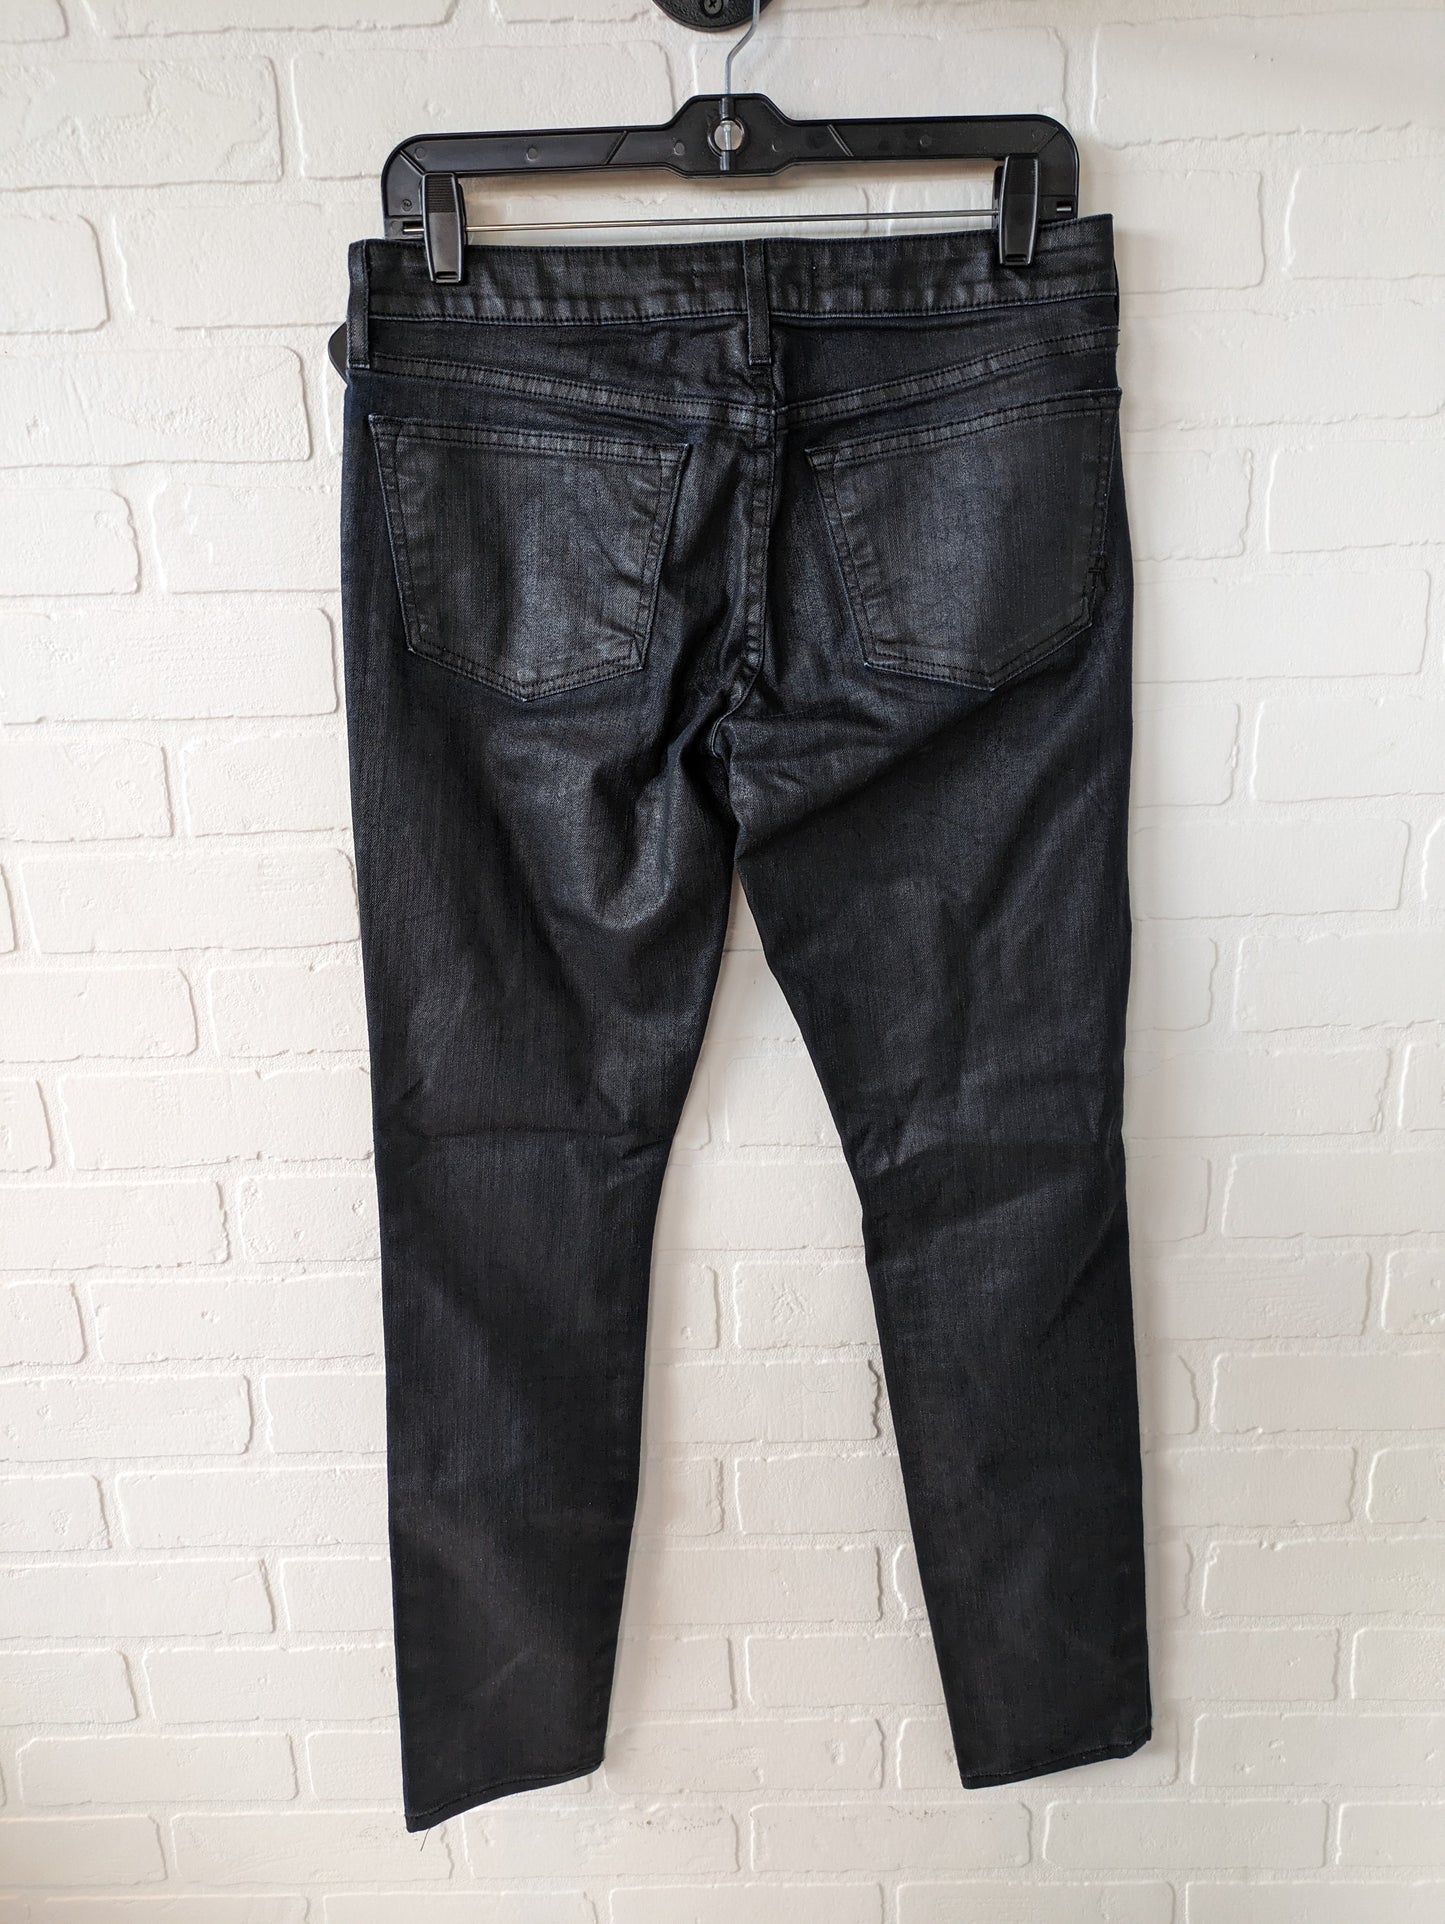 Jeans Skinny By Rich And Skinny  Size: 4